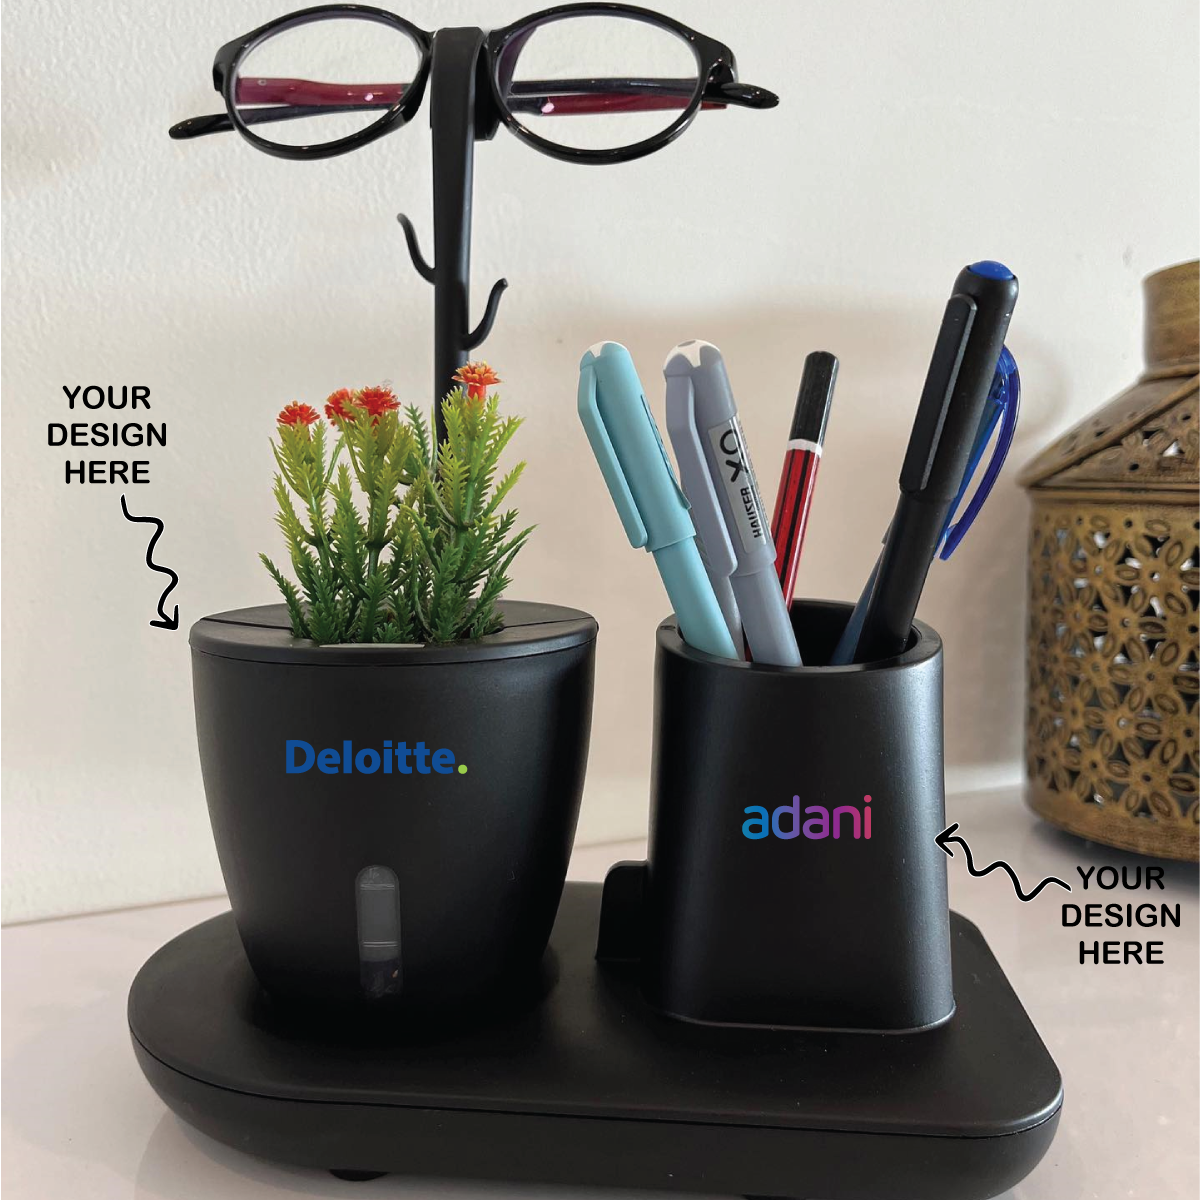 Personalized Multifunctional Desk Organizer, Pen, Glass, Keychain, and Stationery Holder cum Self-Watering Planter - For Corporate Gifting, Birthday Gift, Return Gift, Thoughtful Gifting